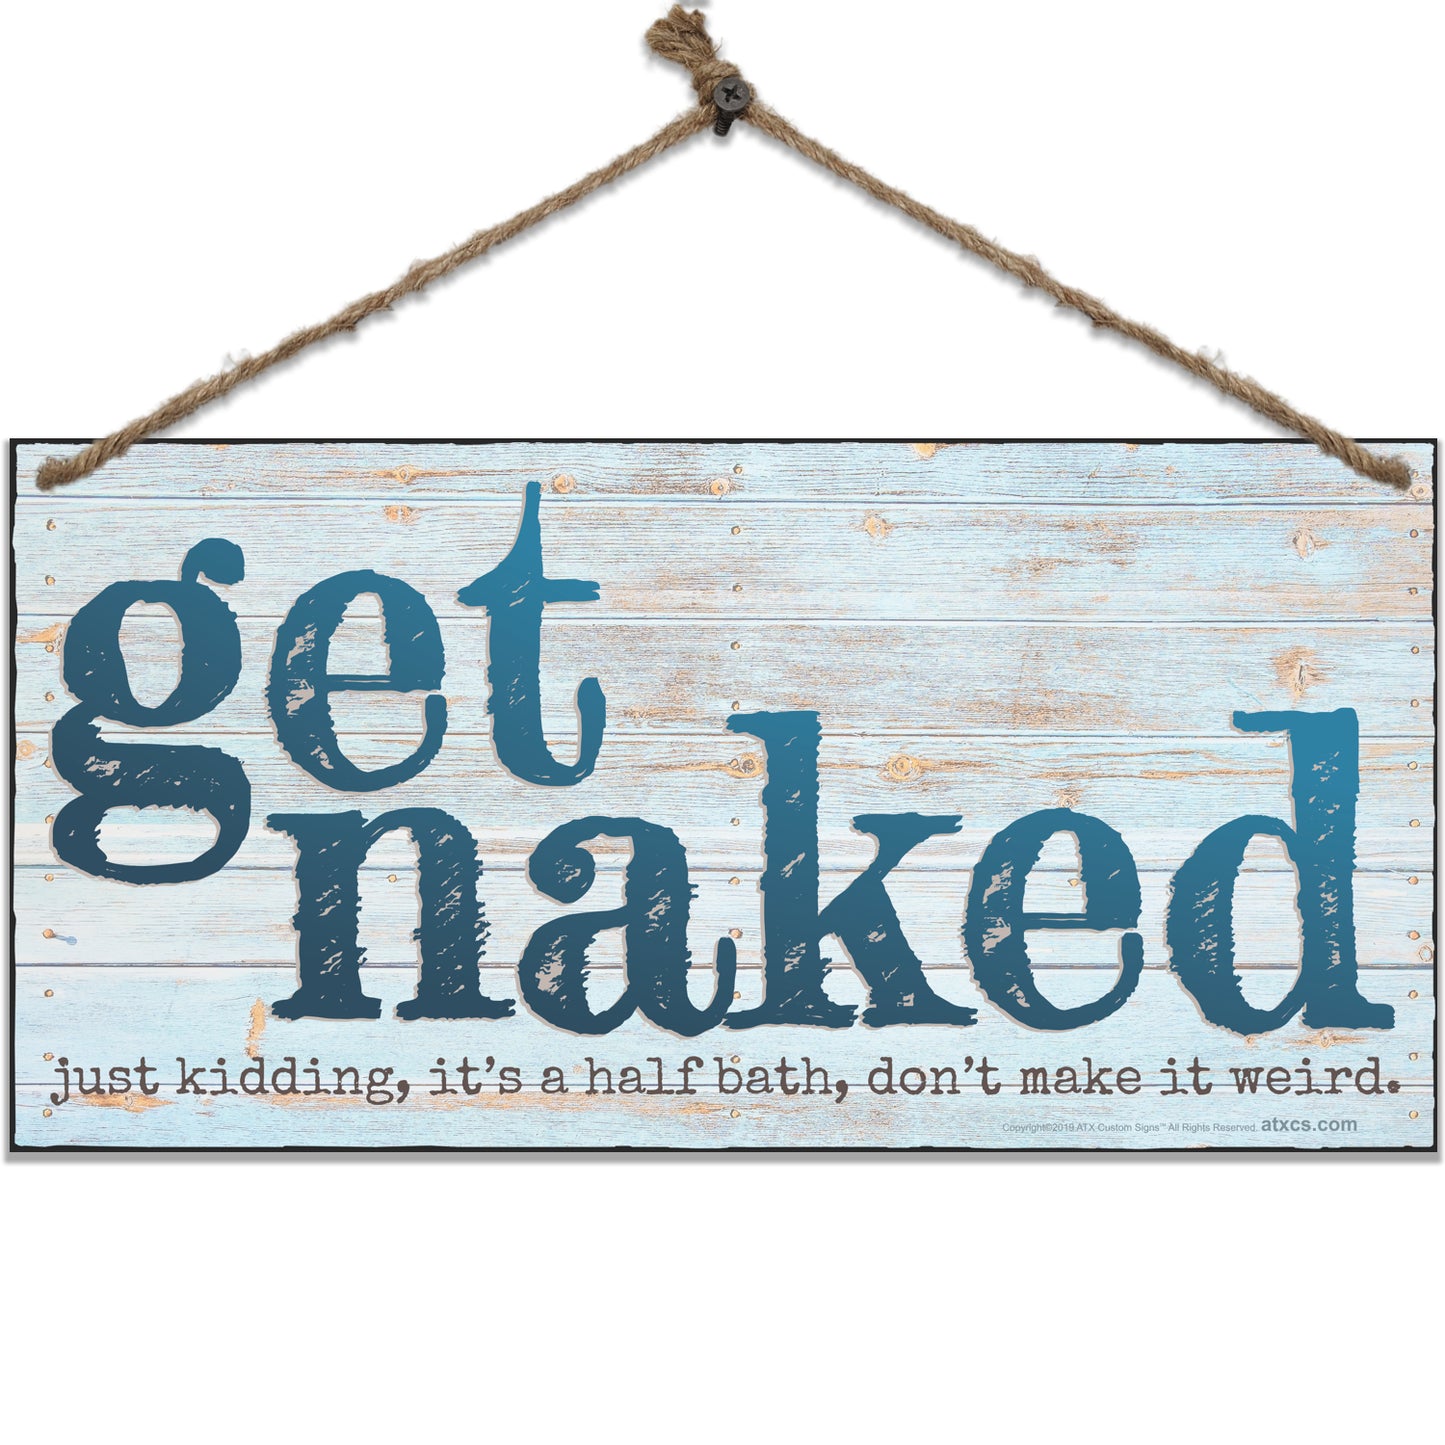 Funny Bathroom Sign Double Sided - Get Naked and Welcome Please Seat Yourself Sign. - Size 6 x 12